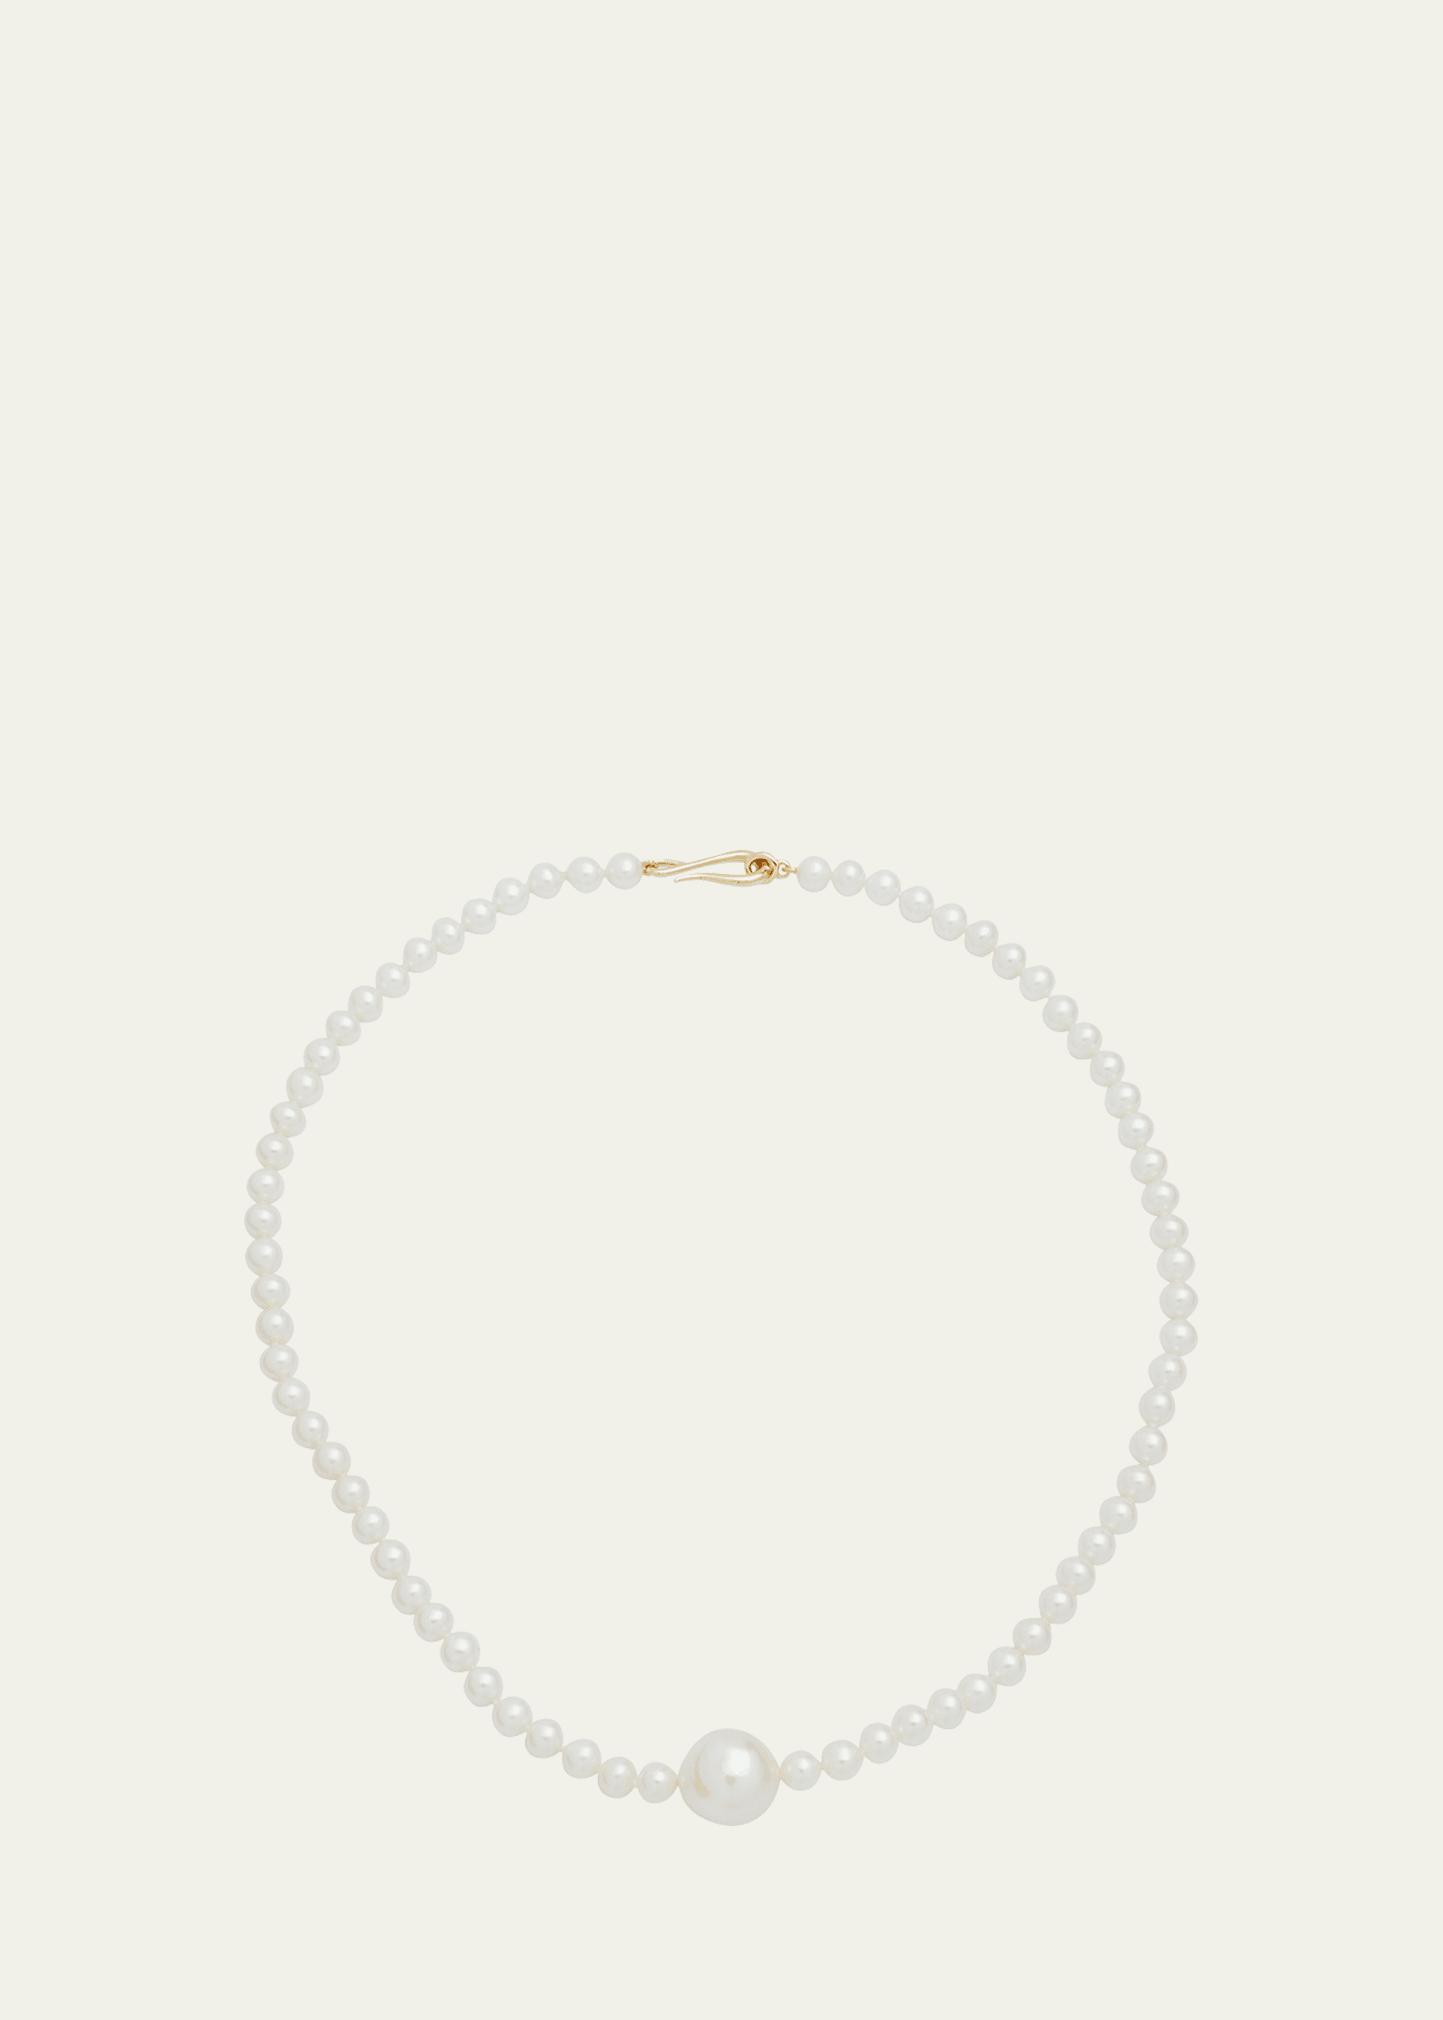 Full Freshwater Pearl Strand Necklace with Large Center